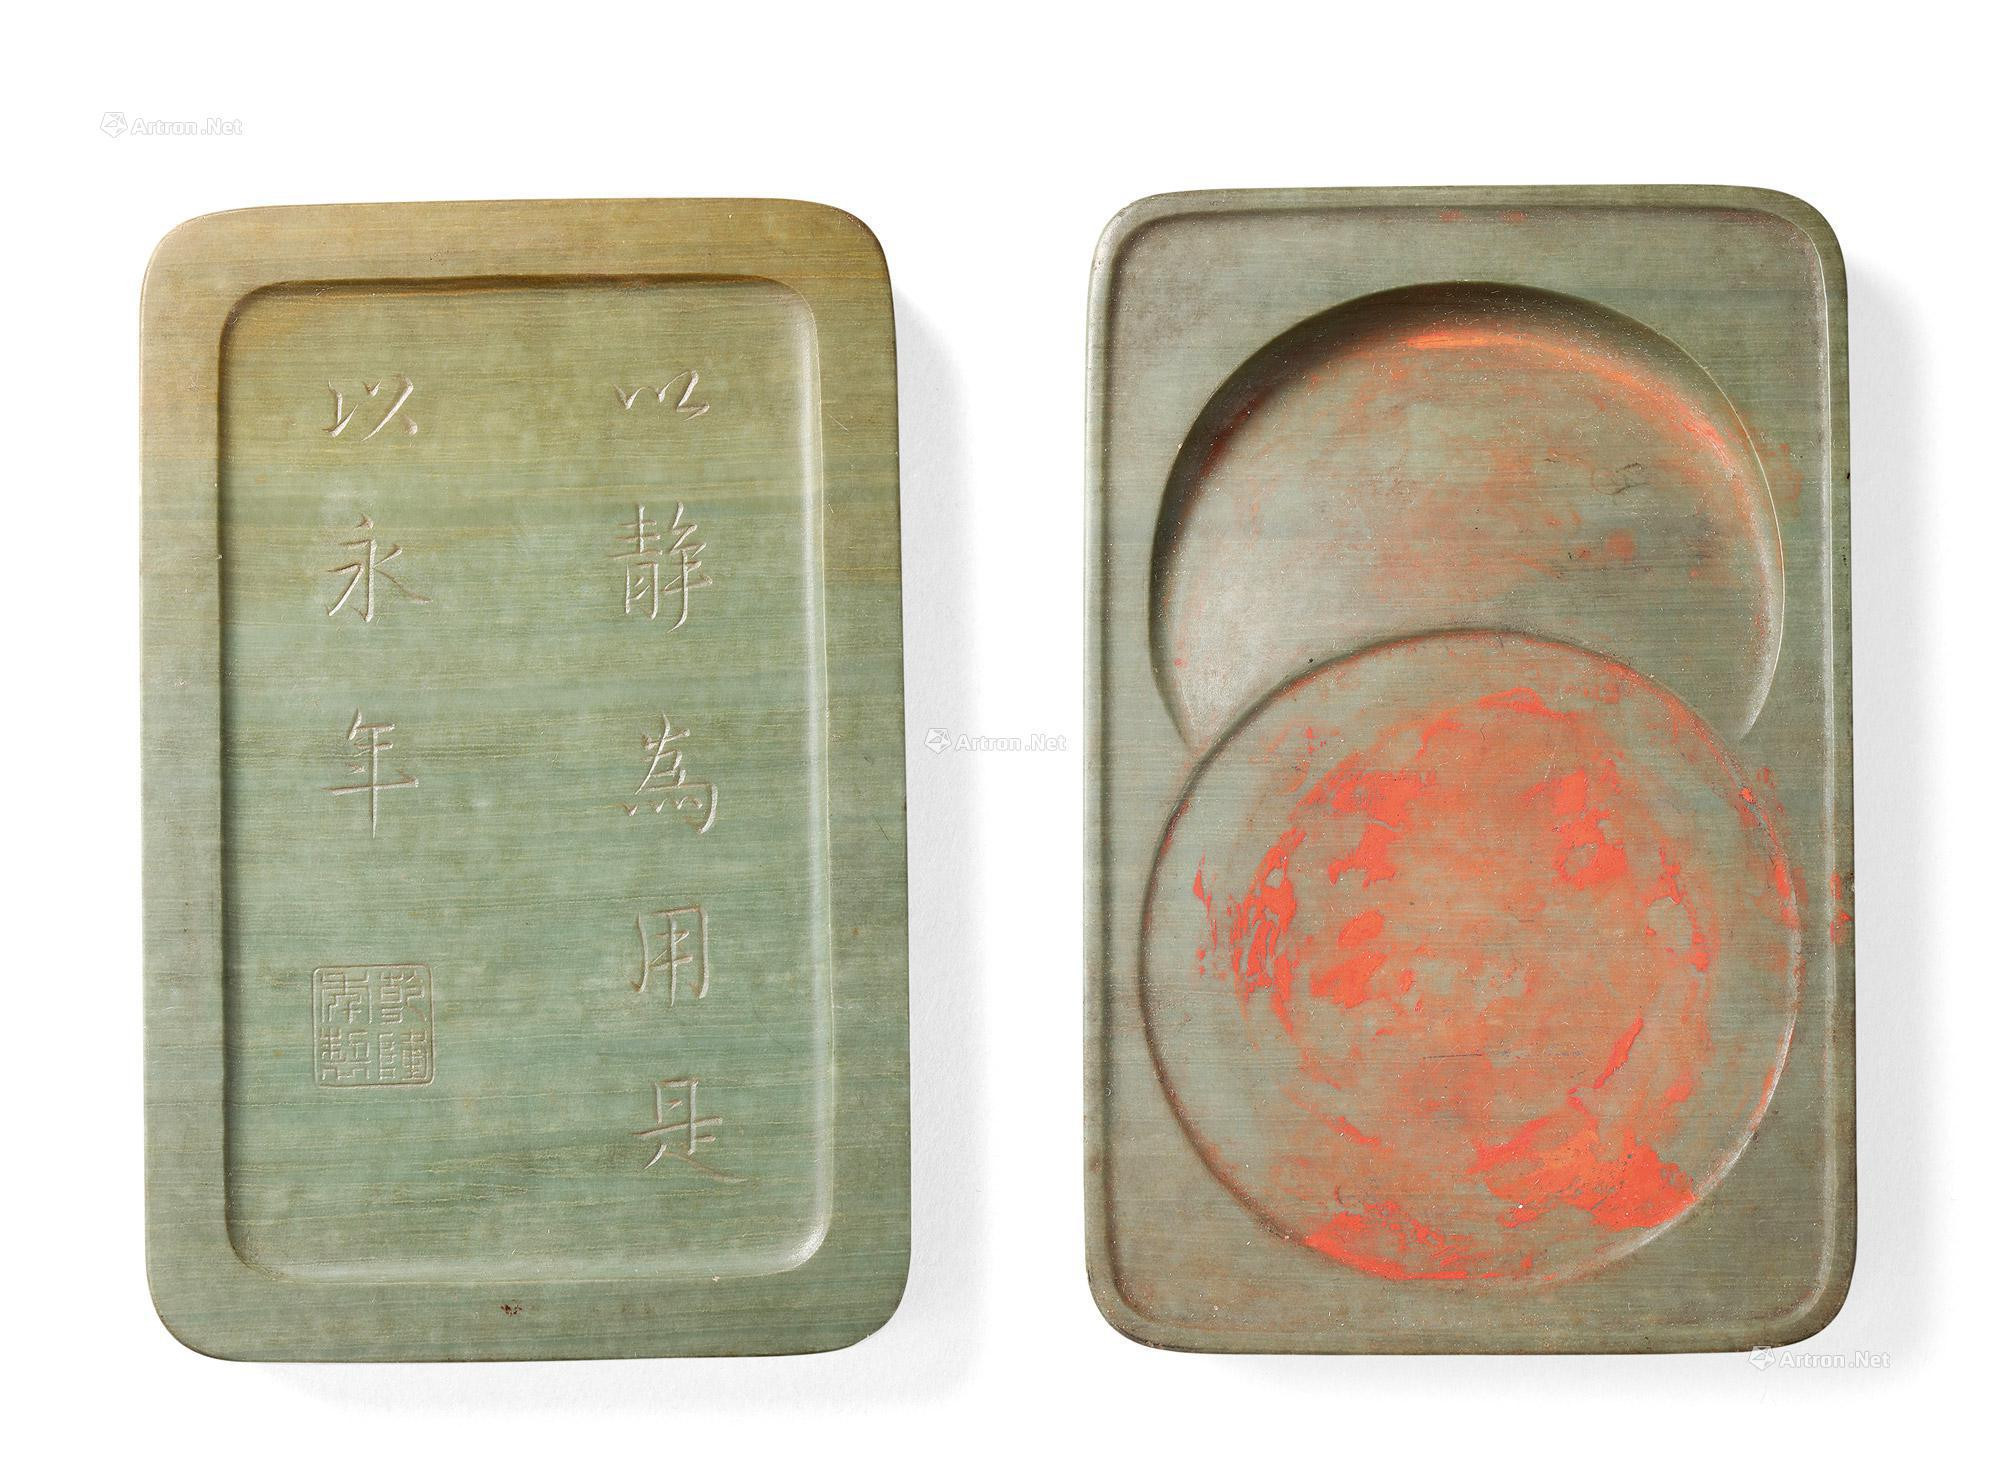 A SONGHUA INKSTONE WITH DOUBLE RING